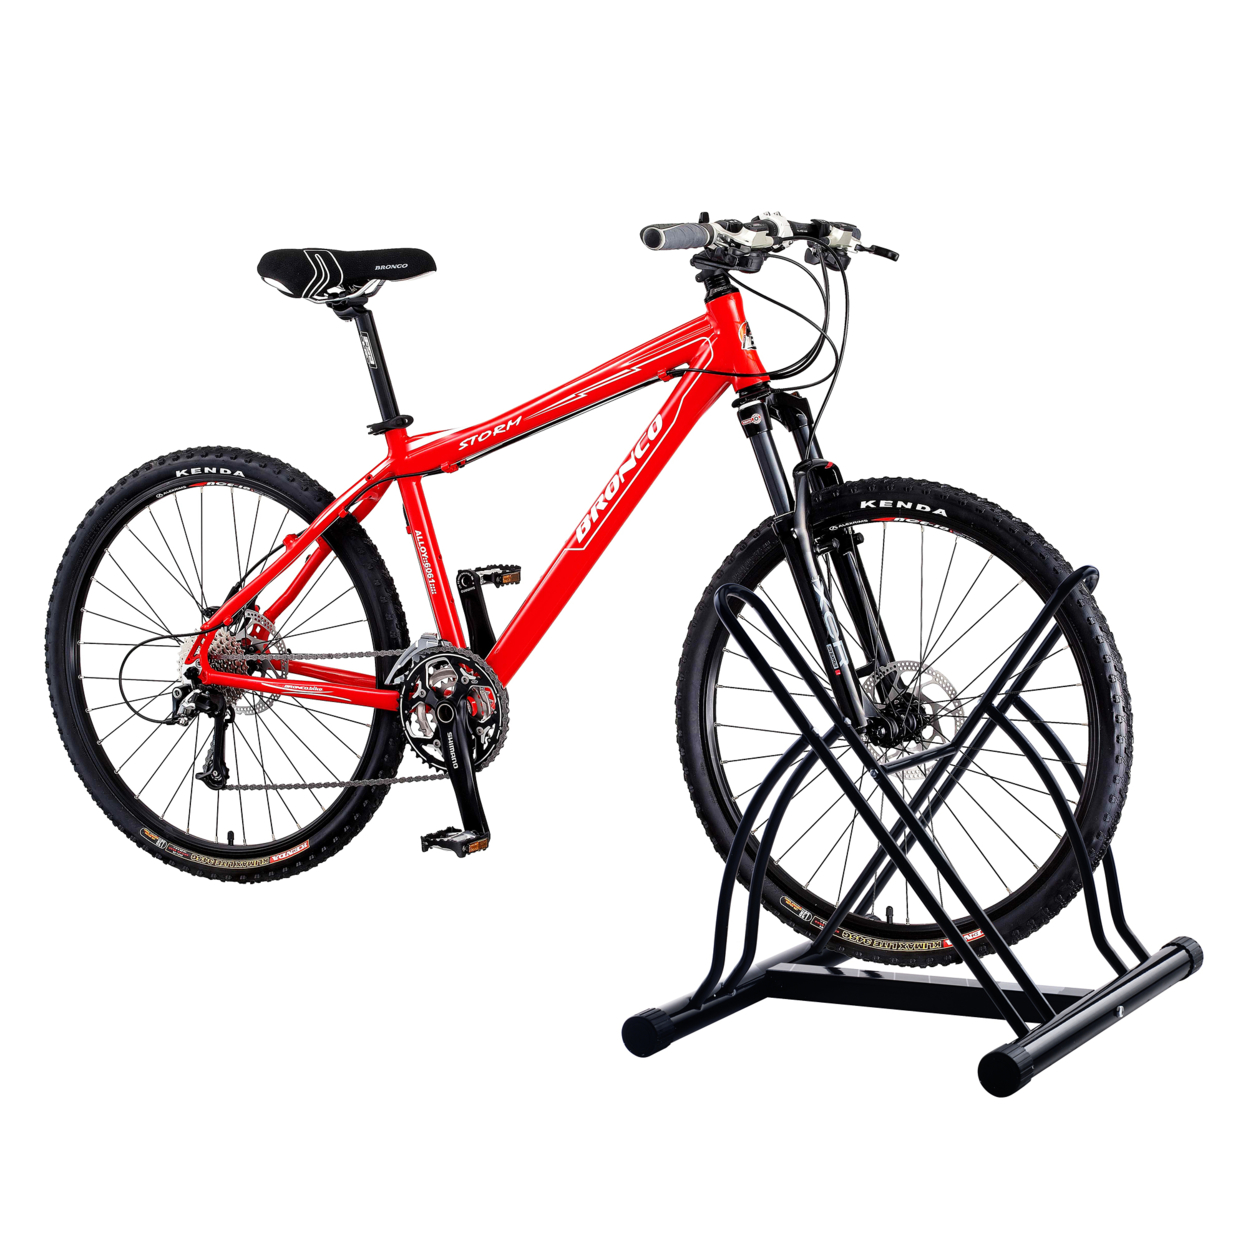 RAD Cycle Mighty Rack Two Bike Floor Stand Bicycle Instant Park Pro-Quality